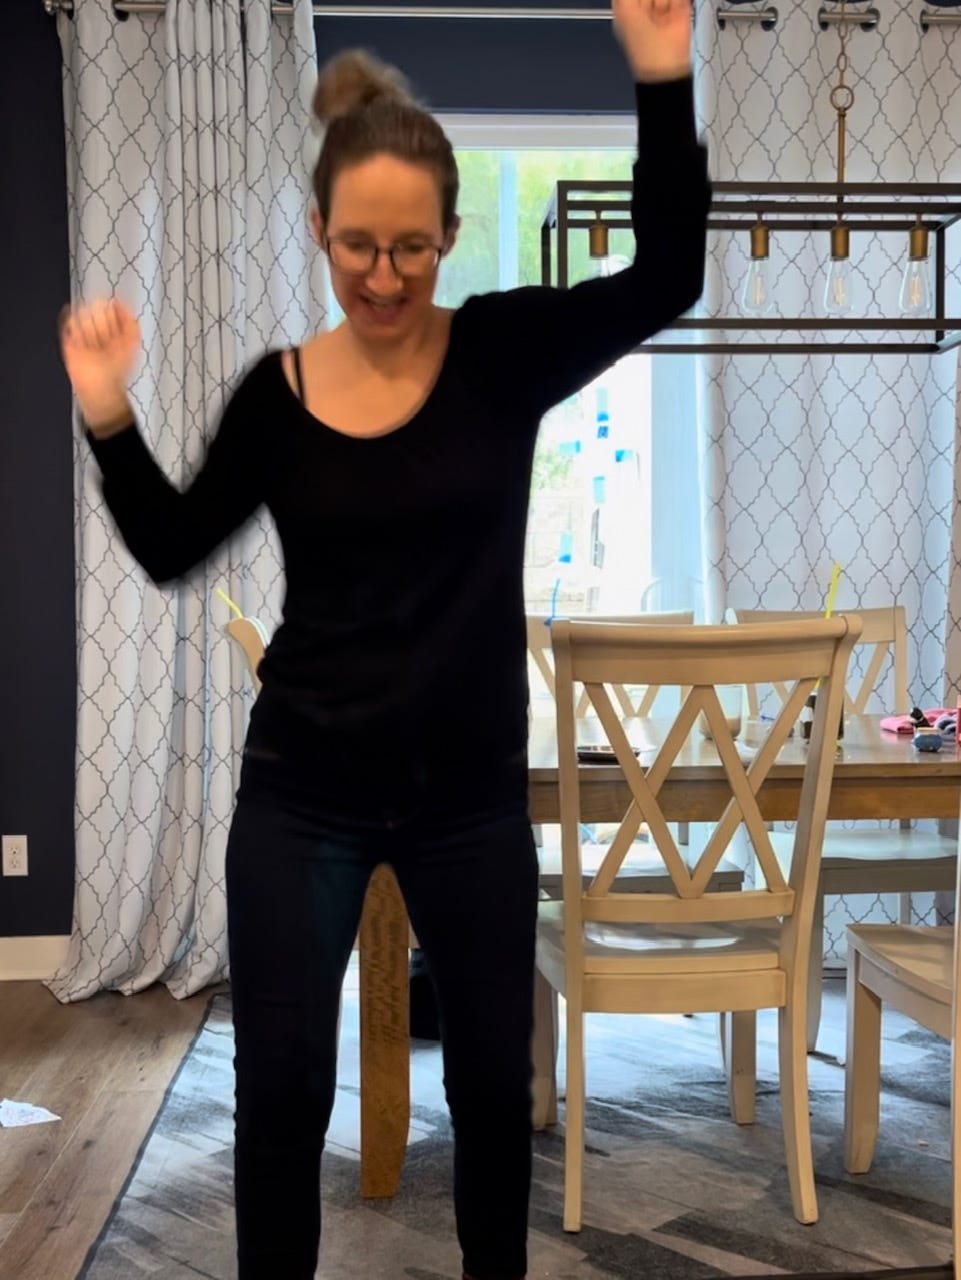 Aly dancing in her kitchen